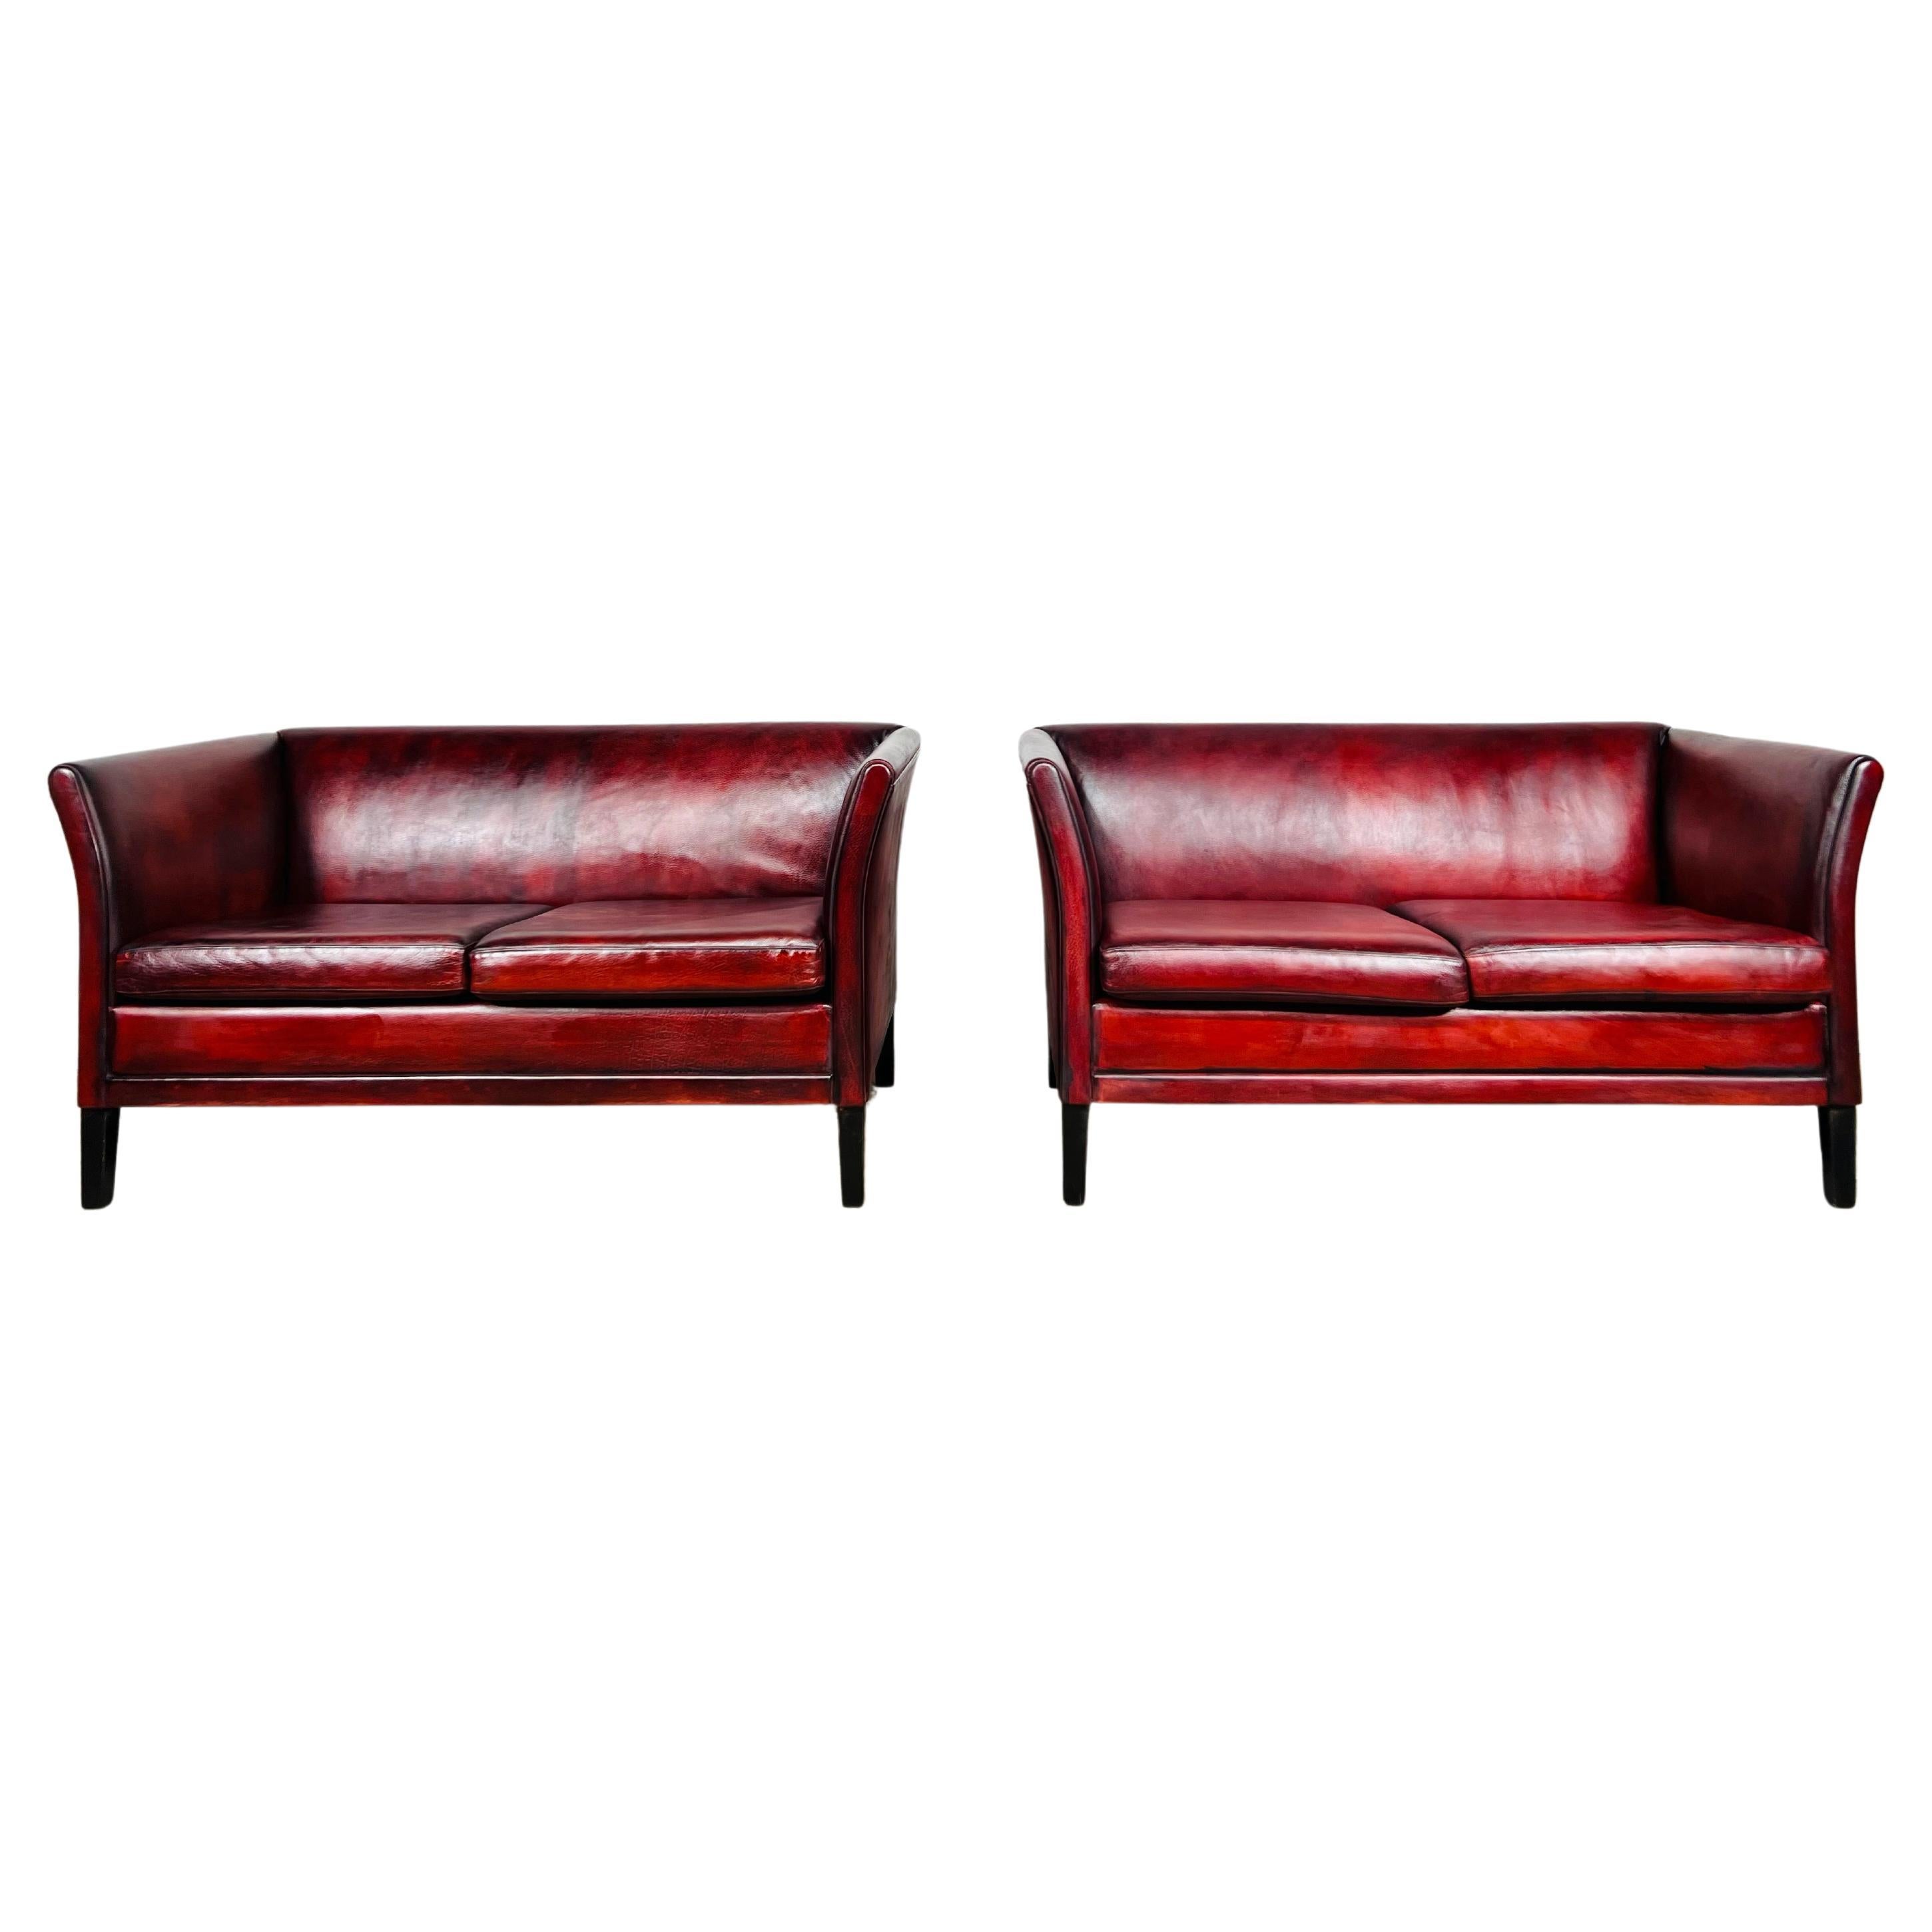 Pair of Neat Vintage Danish 70s Patinated Chestnut Red 2 Seat Leather Sofas#805 For Sale